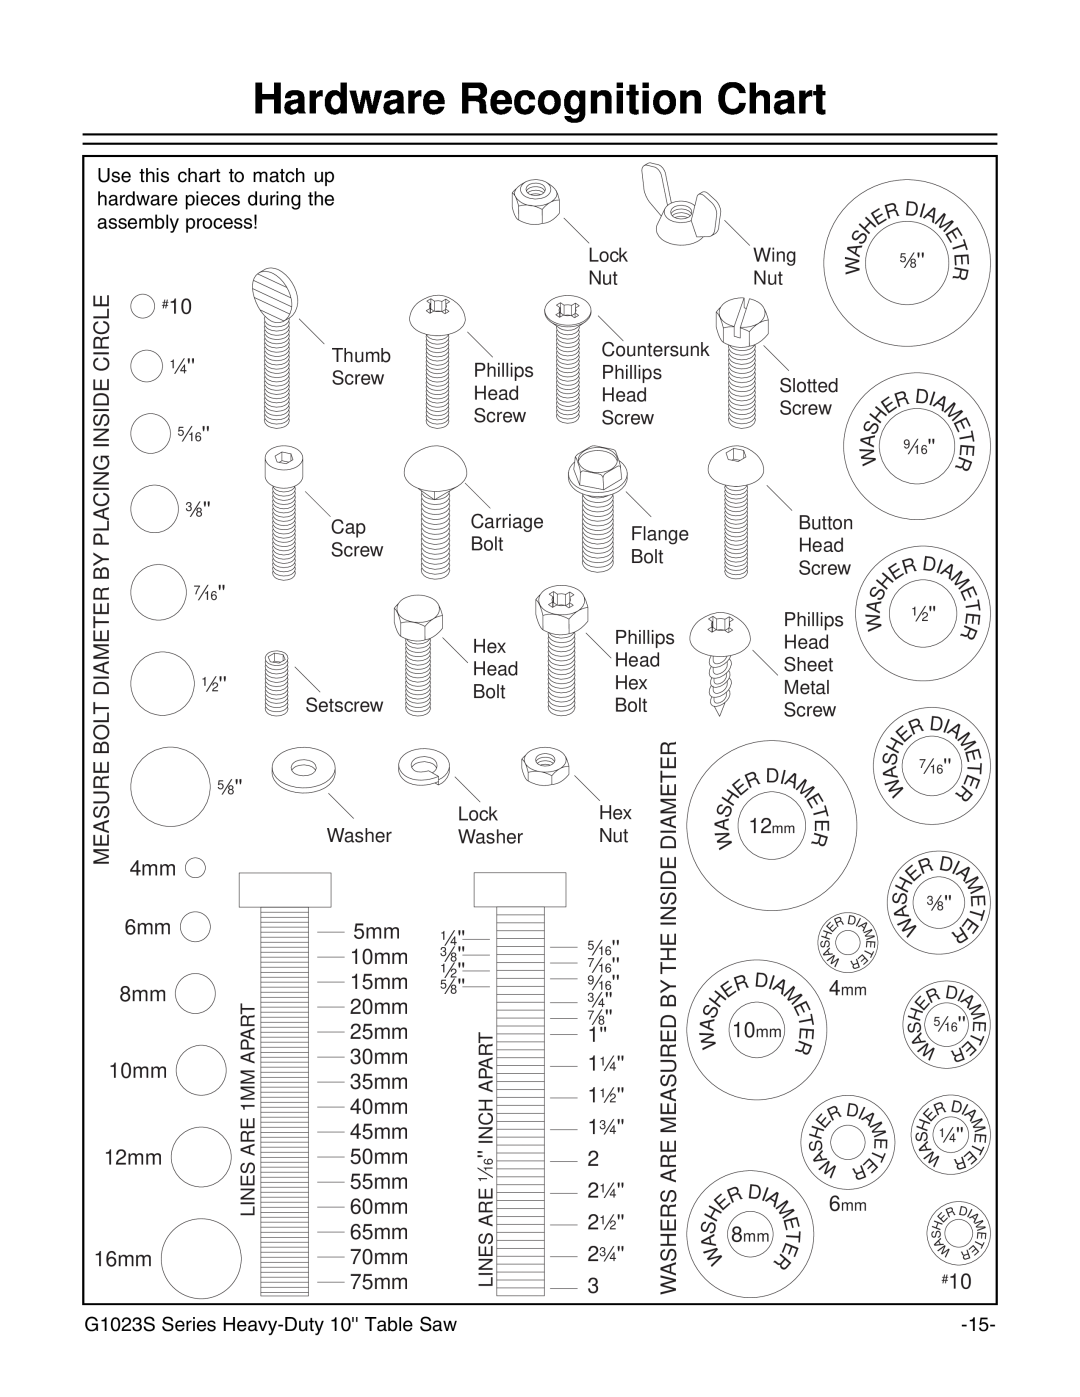 Grizzly MODEL instruction manual Hardware Recognition Chart 